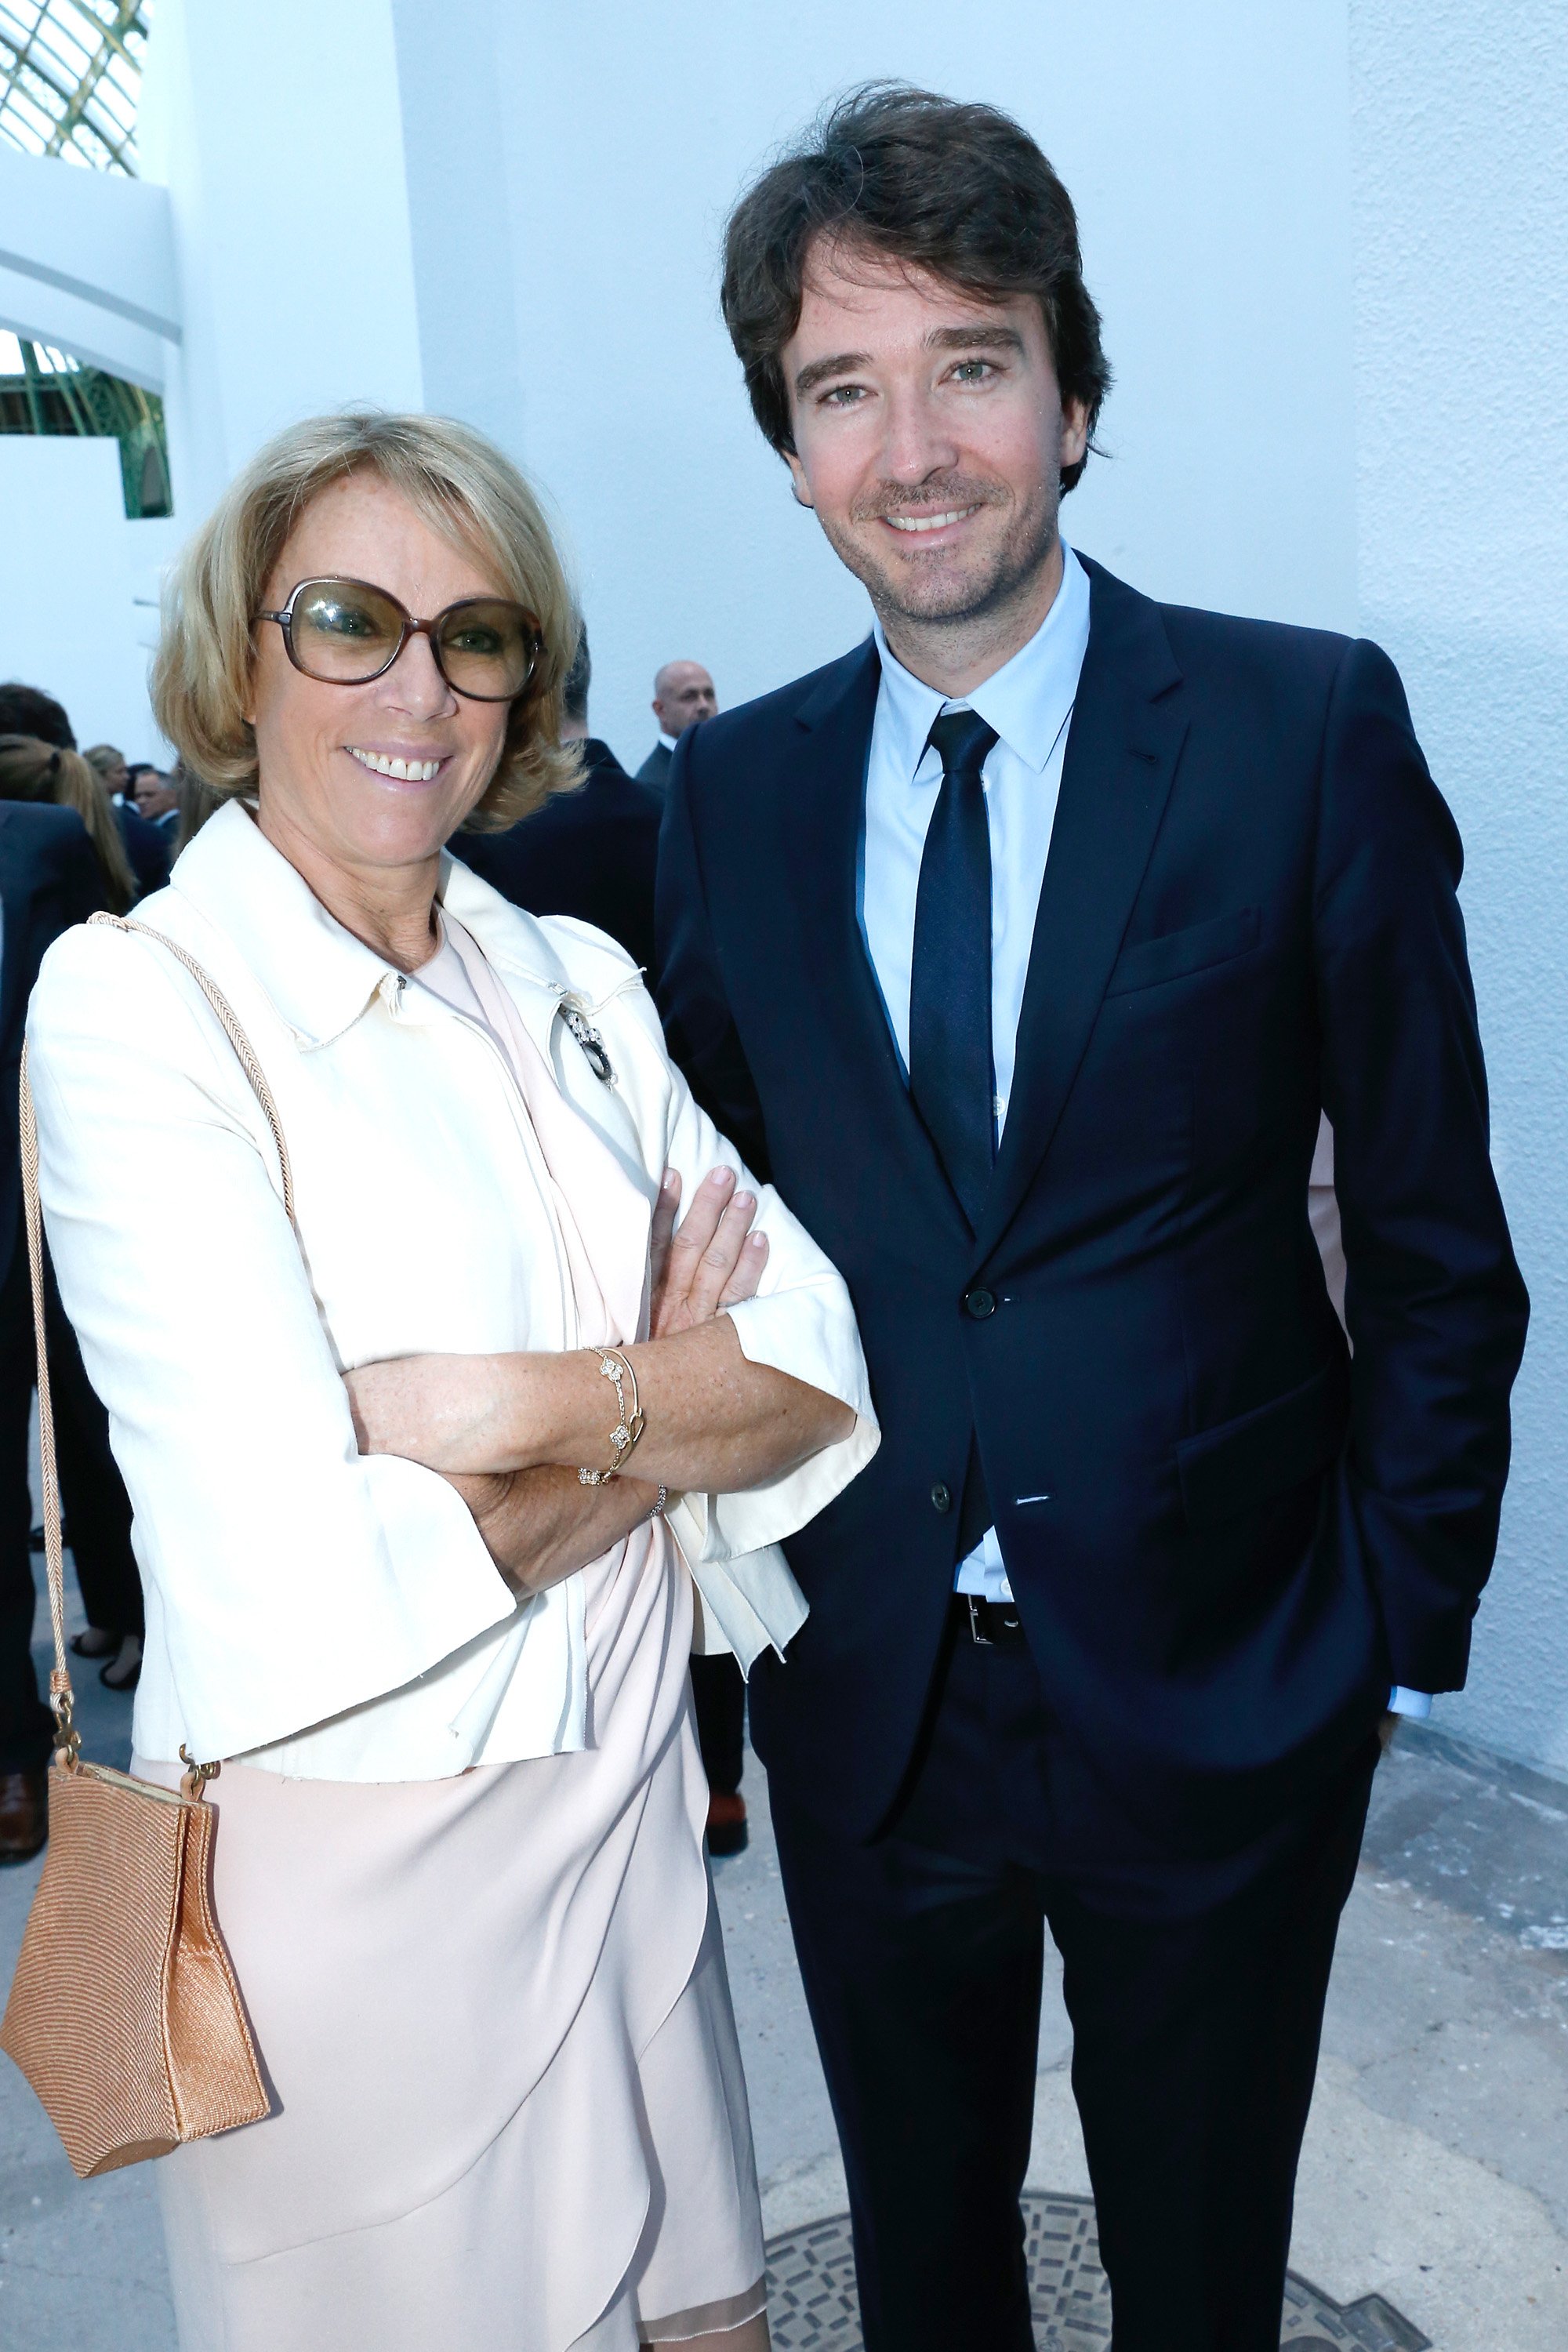 Anne Dewavrin her son Antoine Arnault at 'The strange city' Exhibition in Paris on May 13, 2014 | Source: Getty Images